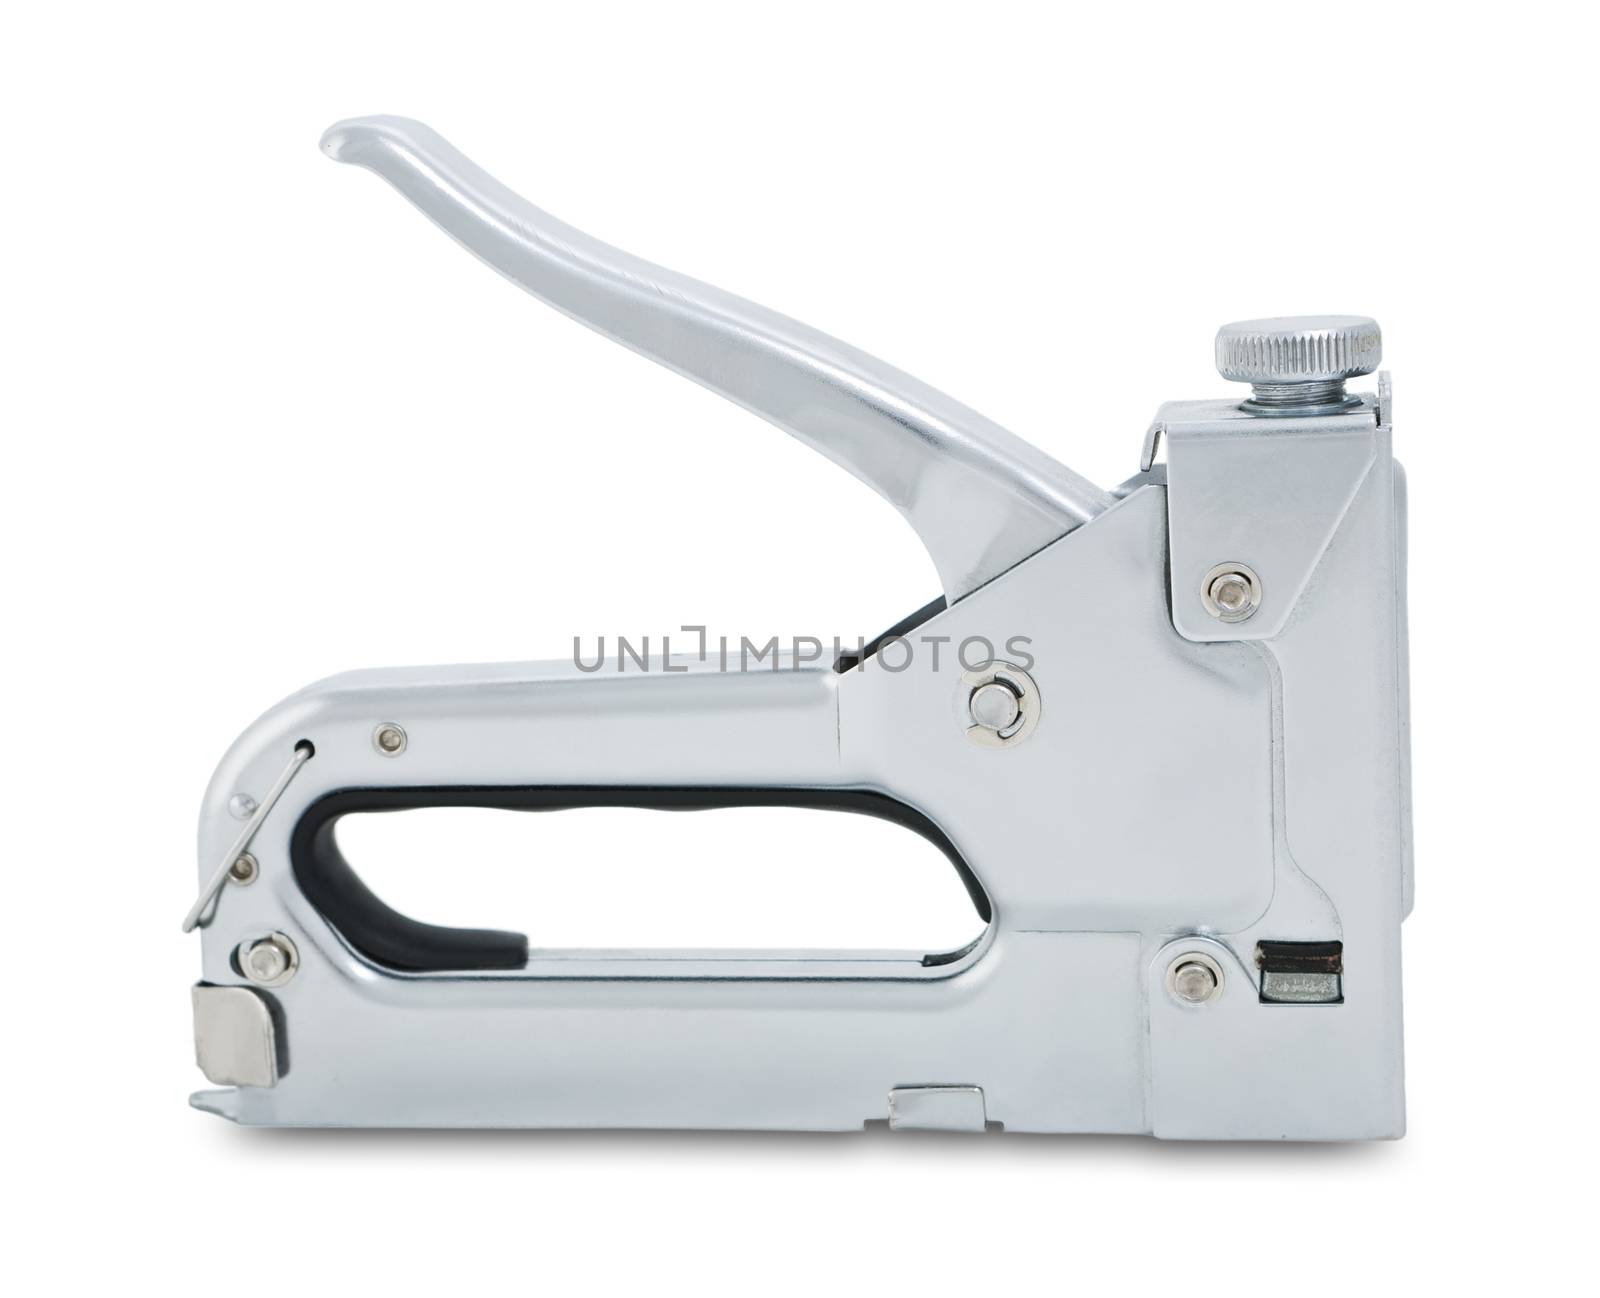 Industrial stapler by mihalec